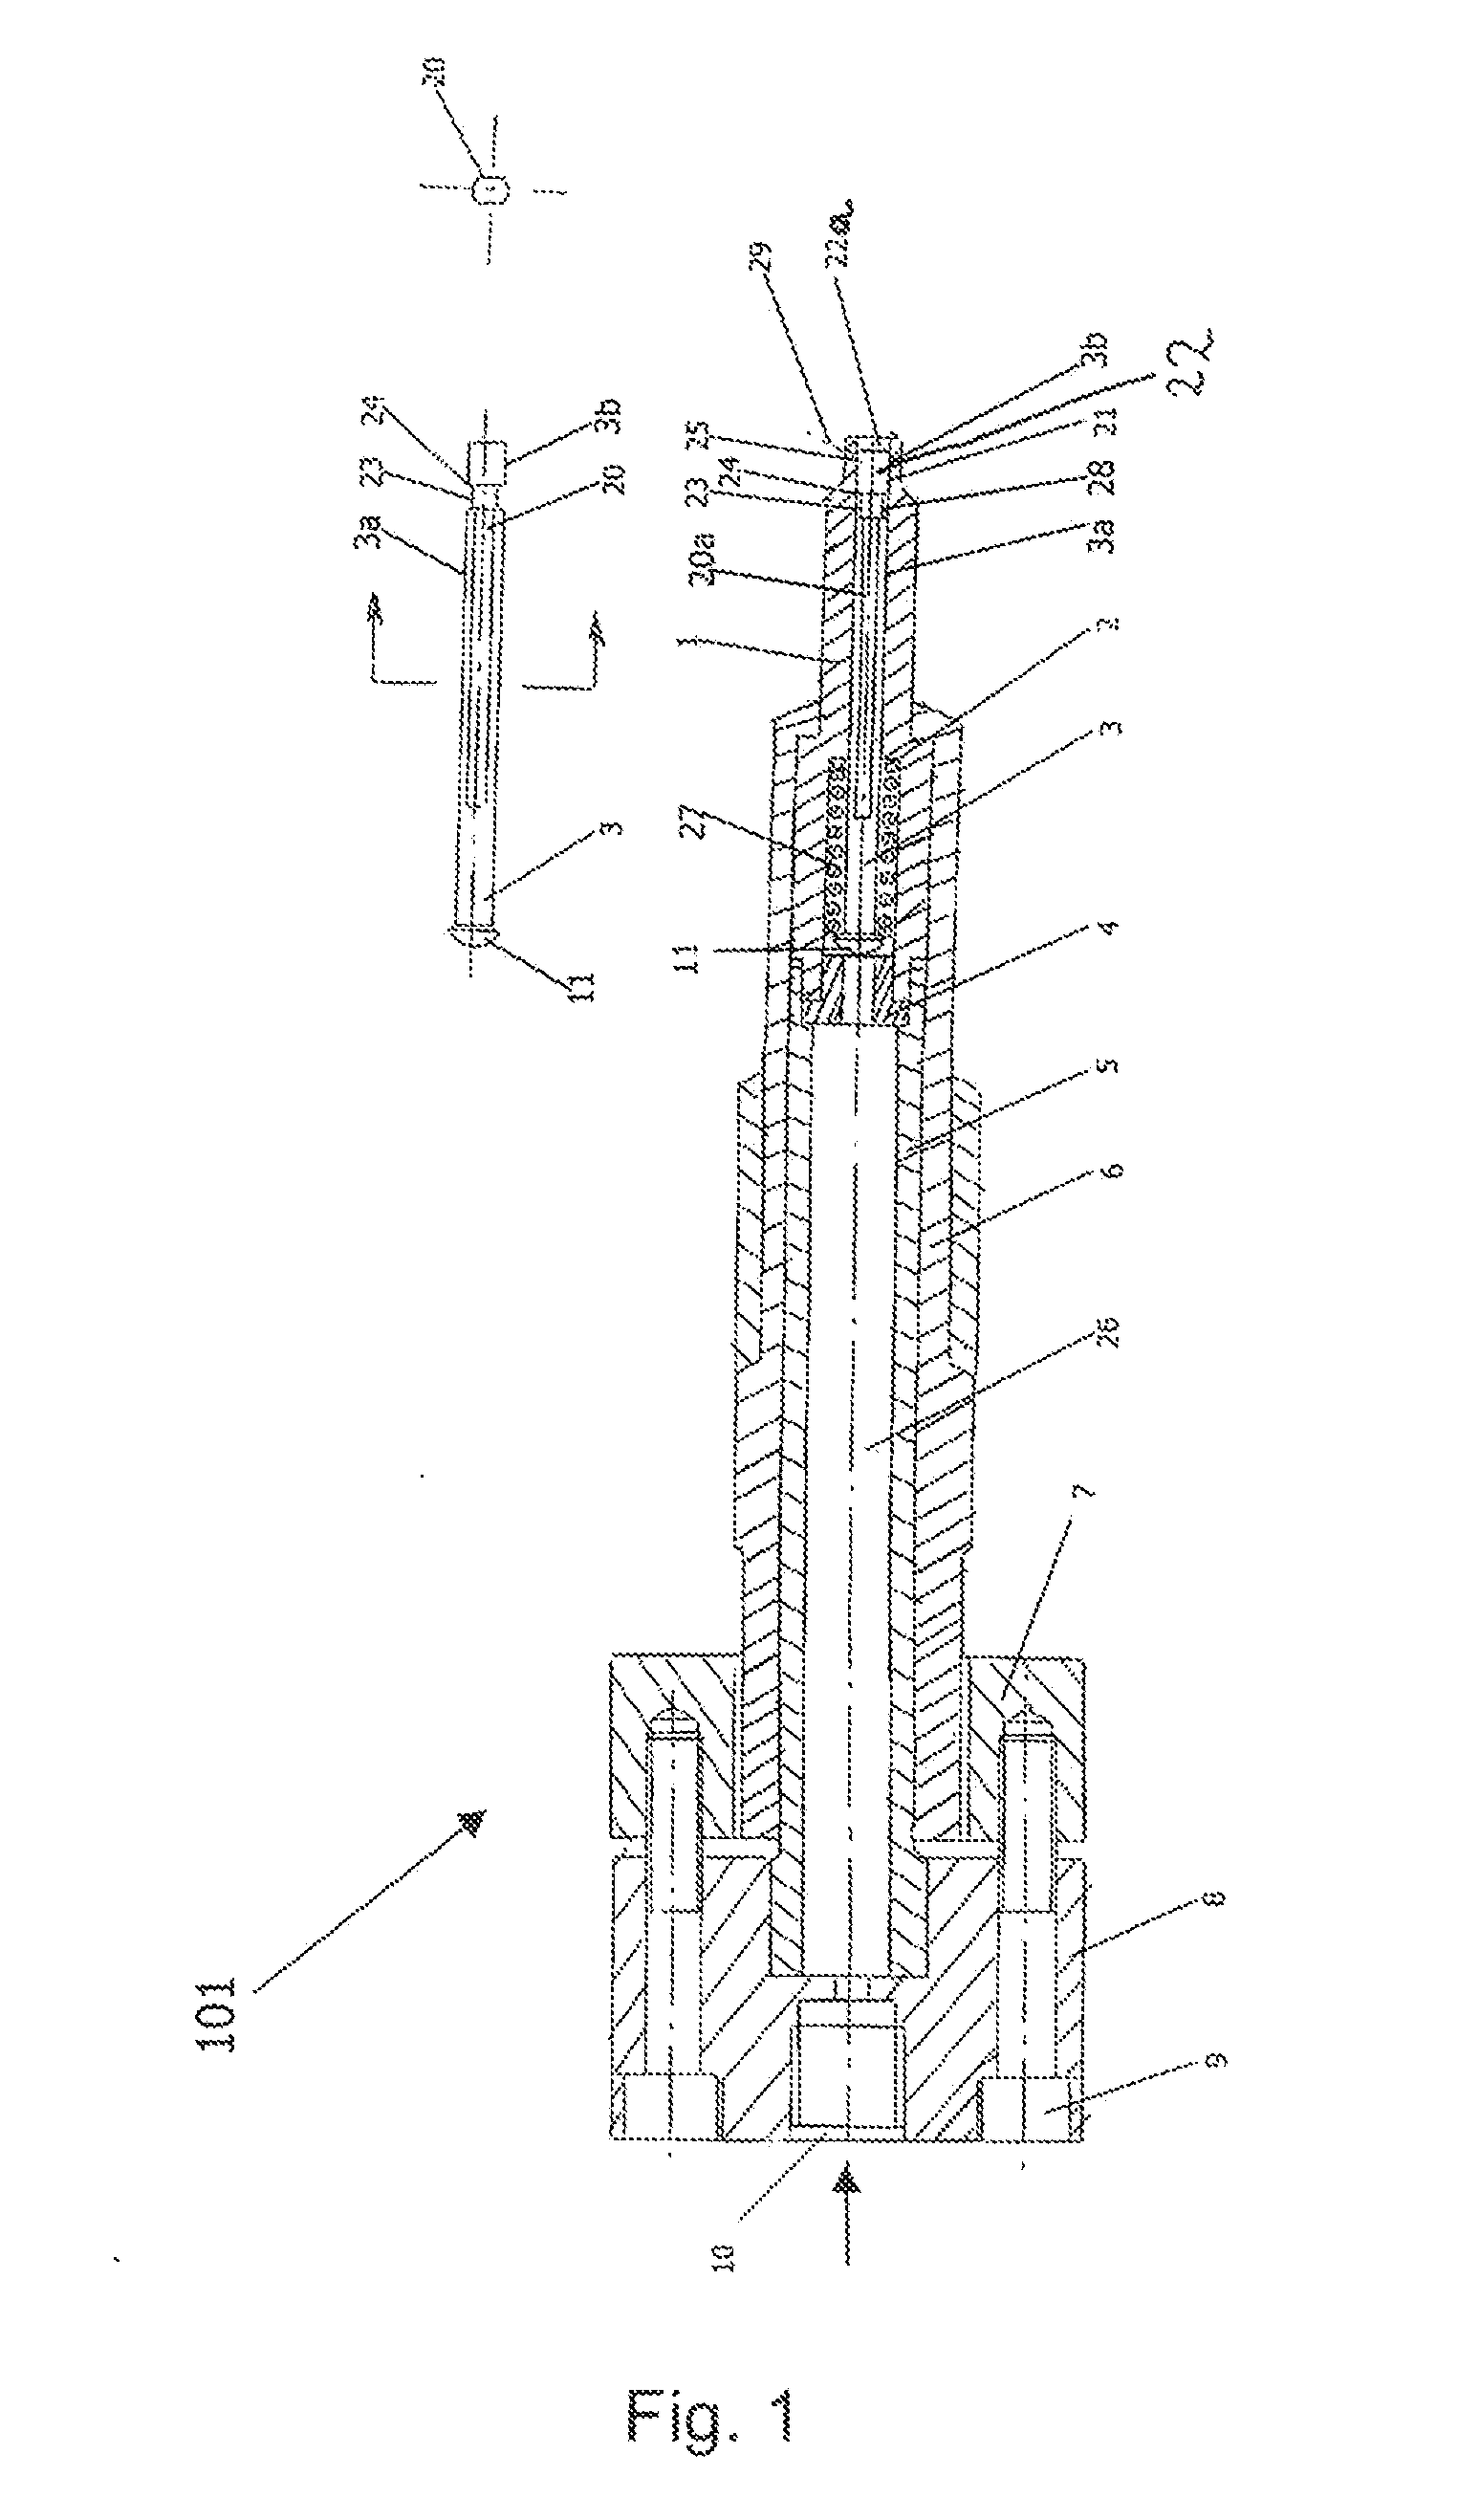 Injection nozzle for injecting lubricating oil in engine cylinders and use thereof